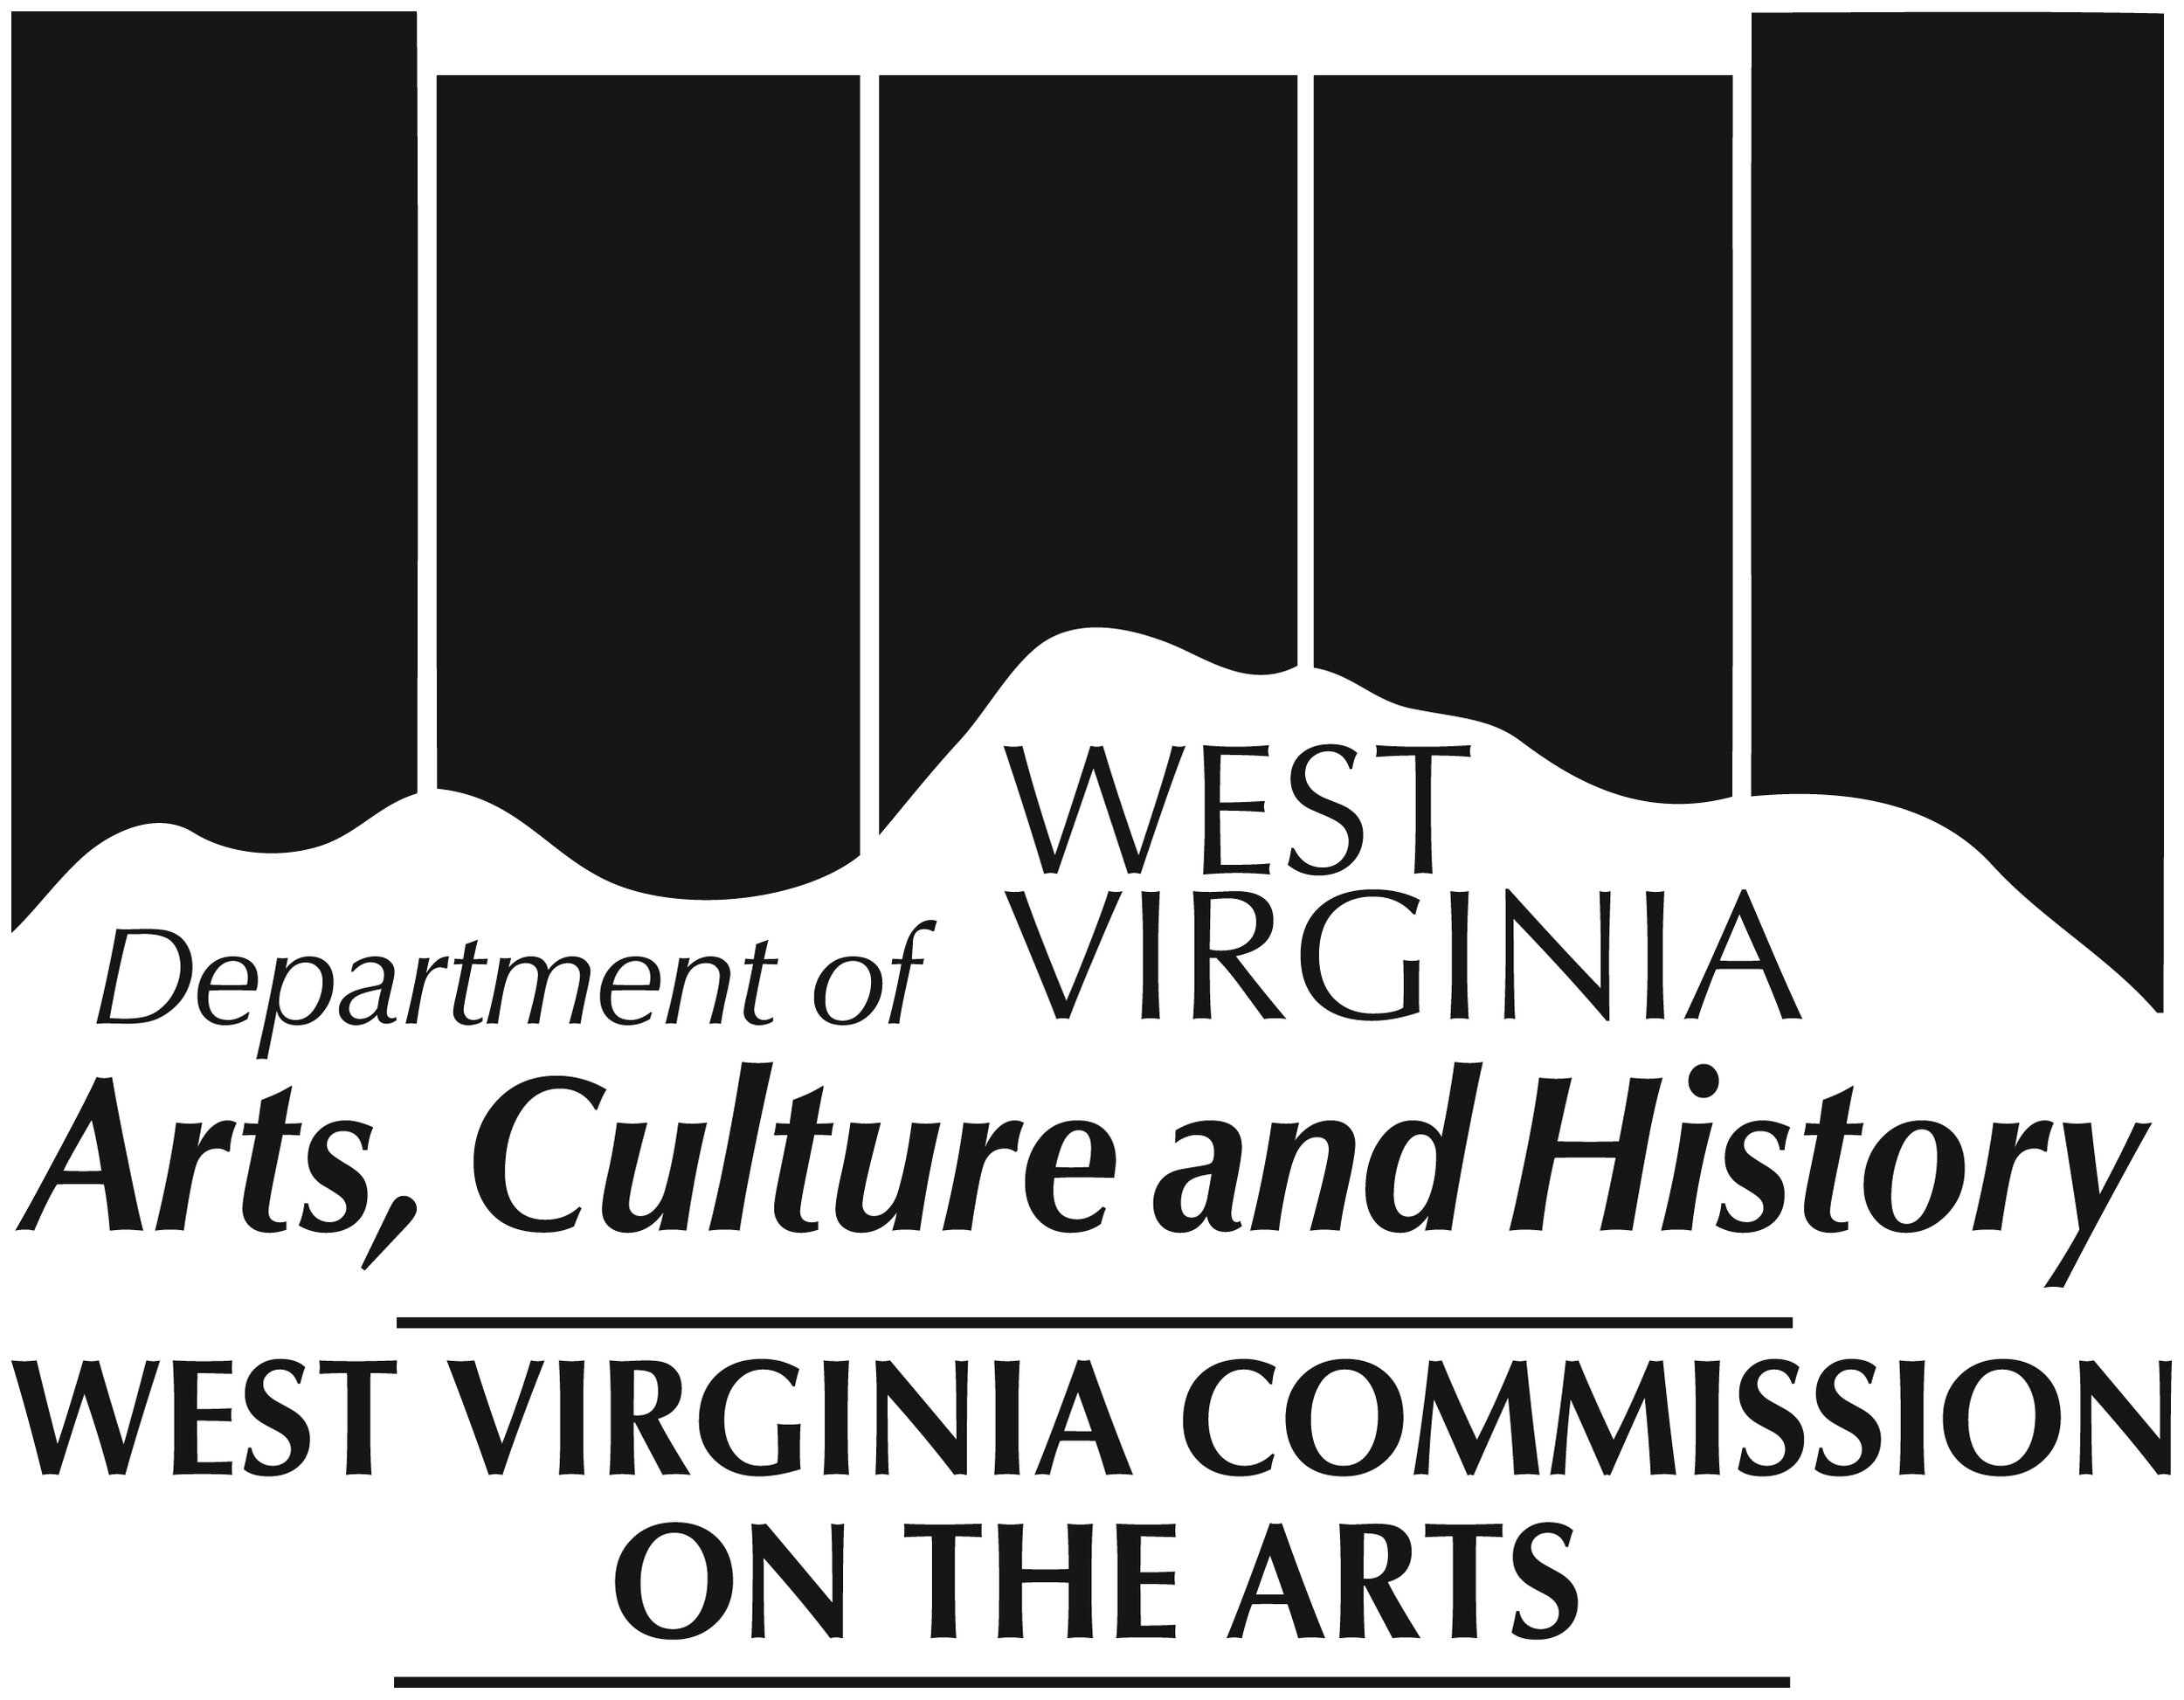 West Virginia Department of Arts, Culture and History